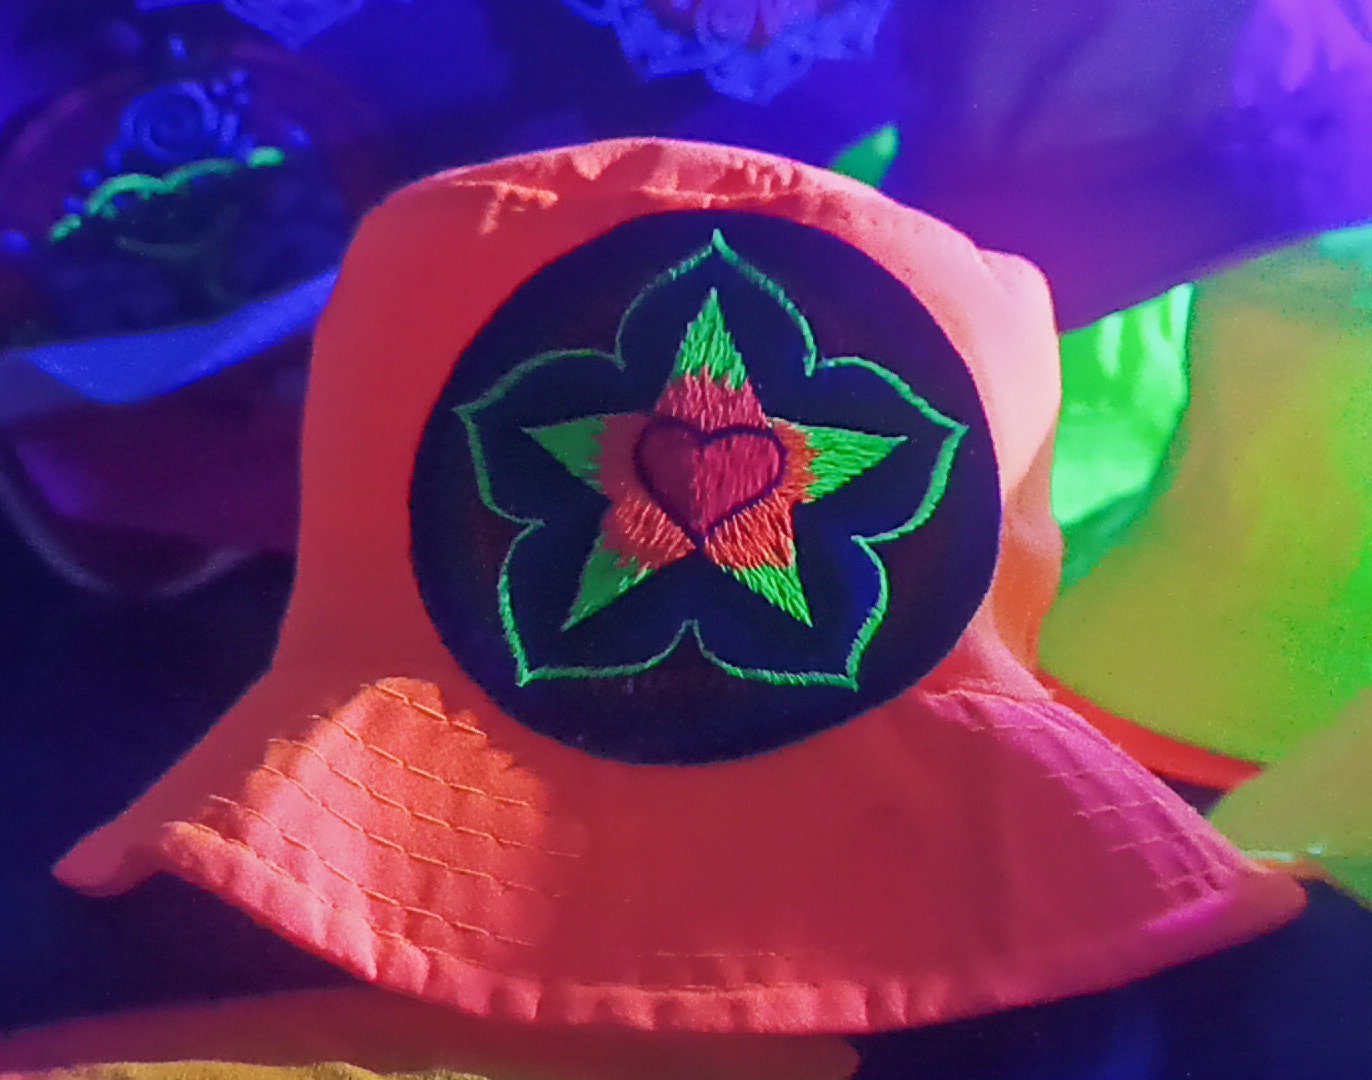 Starseed Love Heart  UV Orange Fisher Hat blacklight glowing with embroidery patch psychedelic trance goatrance hippie fisherhat Lotus Heart